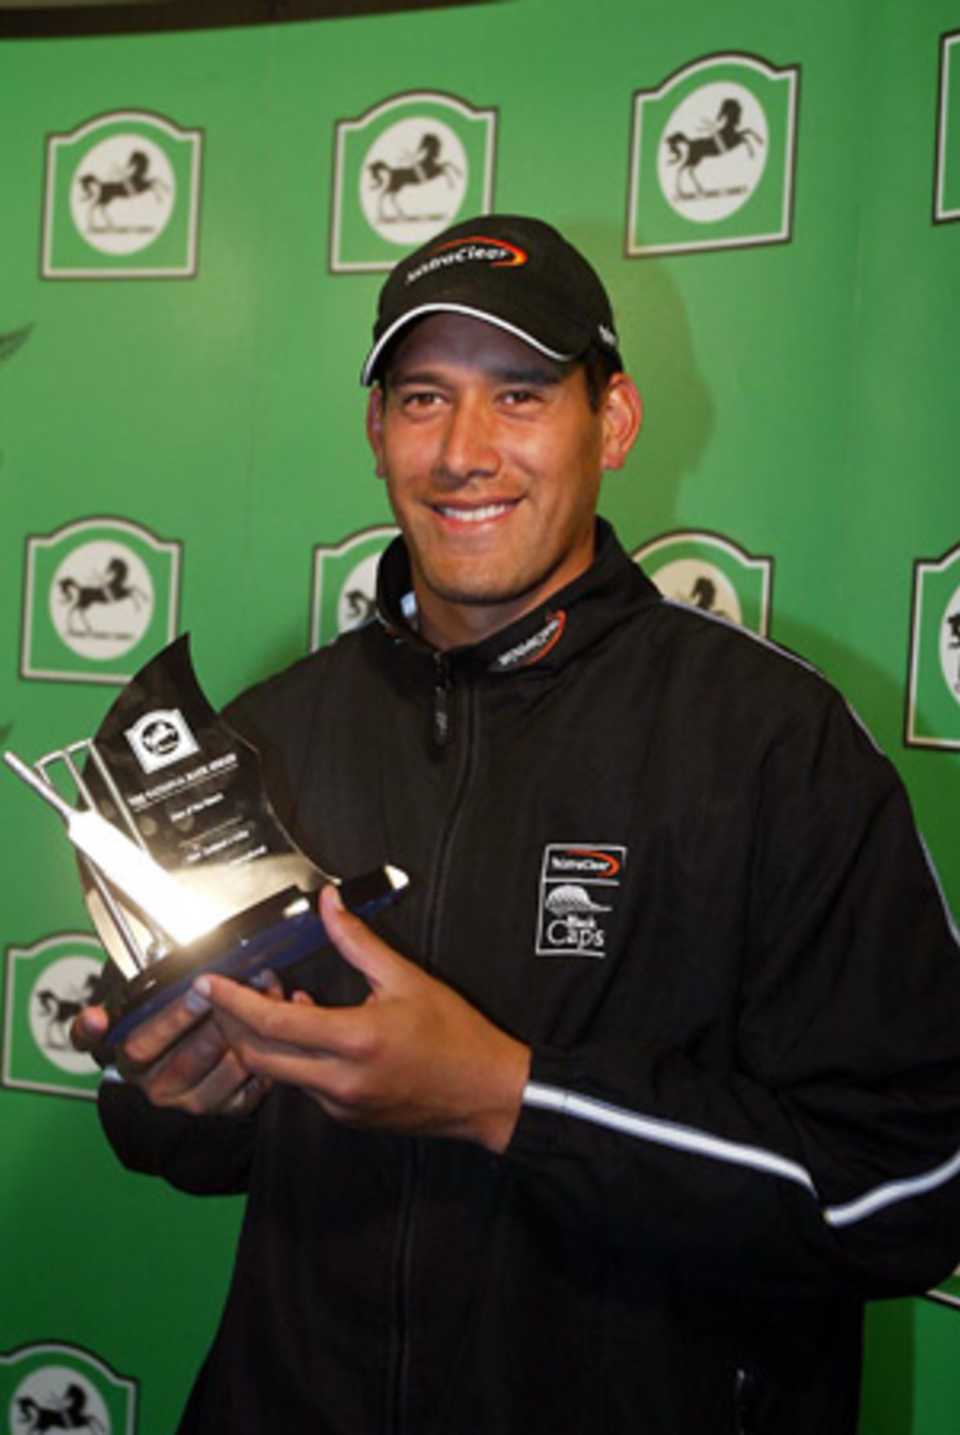 New Zealand player Daryl Tuffey with his man of the match award after taking 2-11 from 10 overs. 3rd ODI: New Zealand v India at Jade Stadium, Christchurch, 1 January 2003.